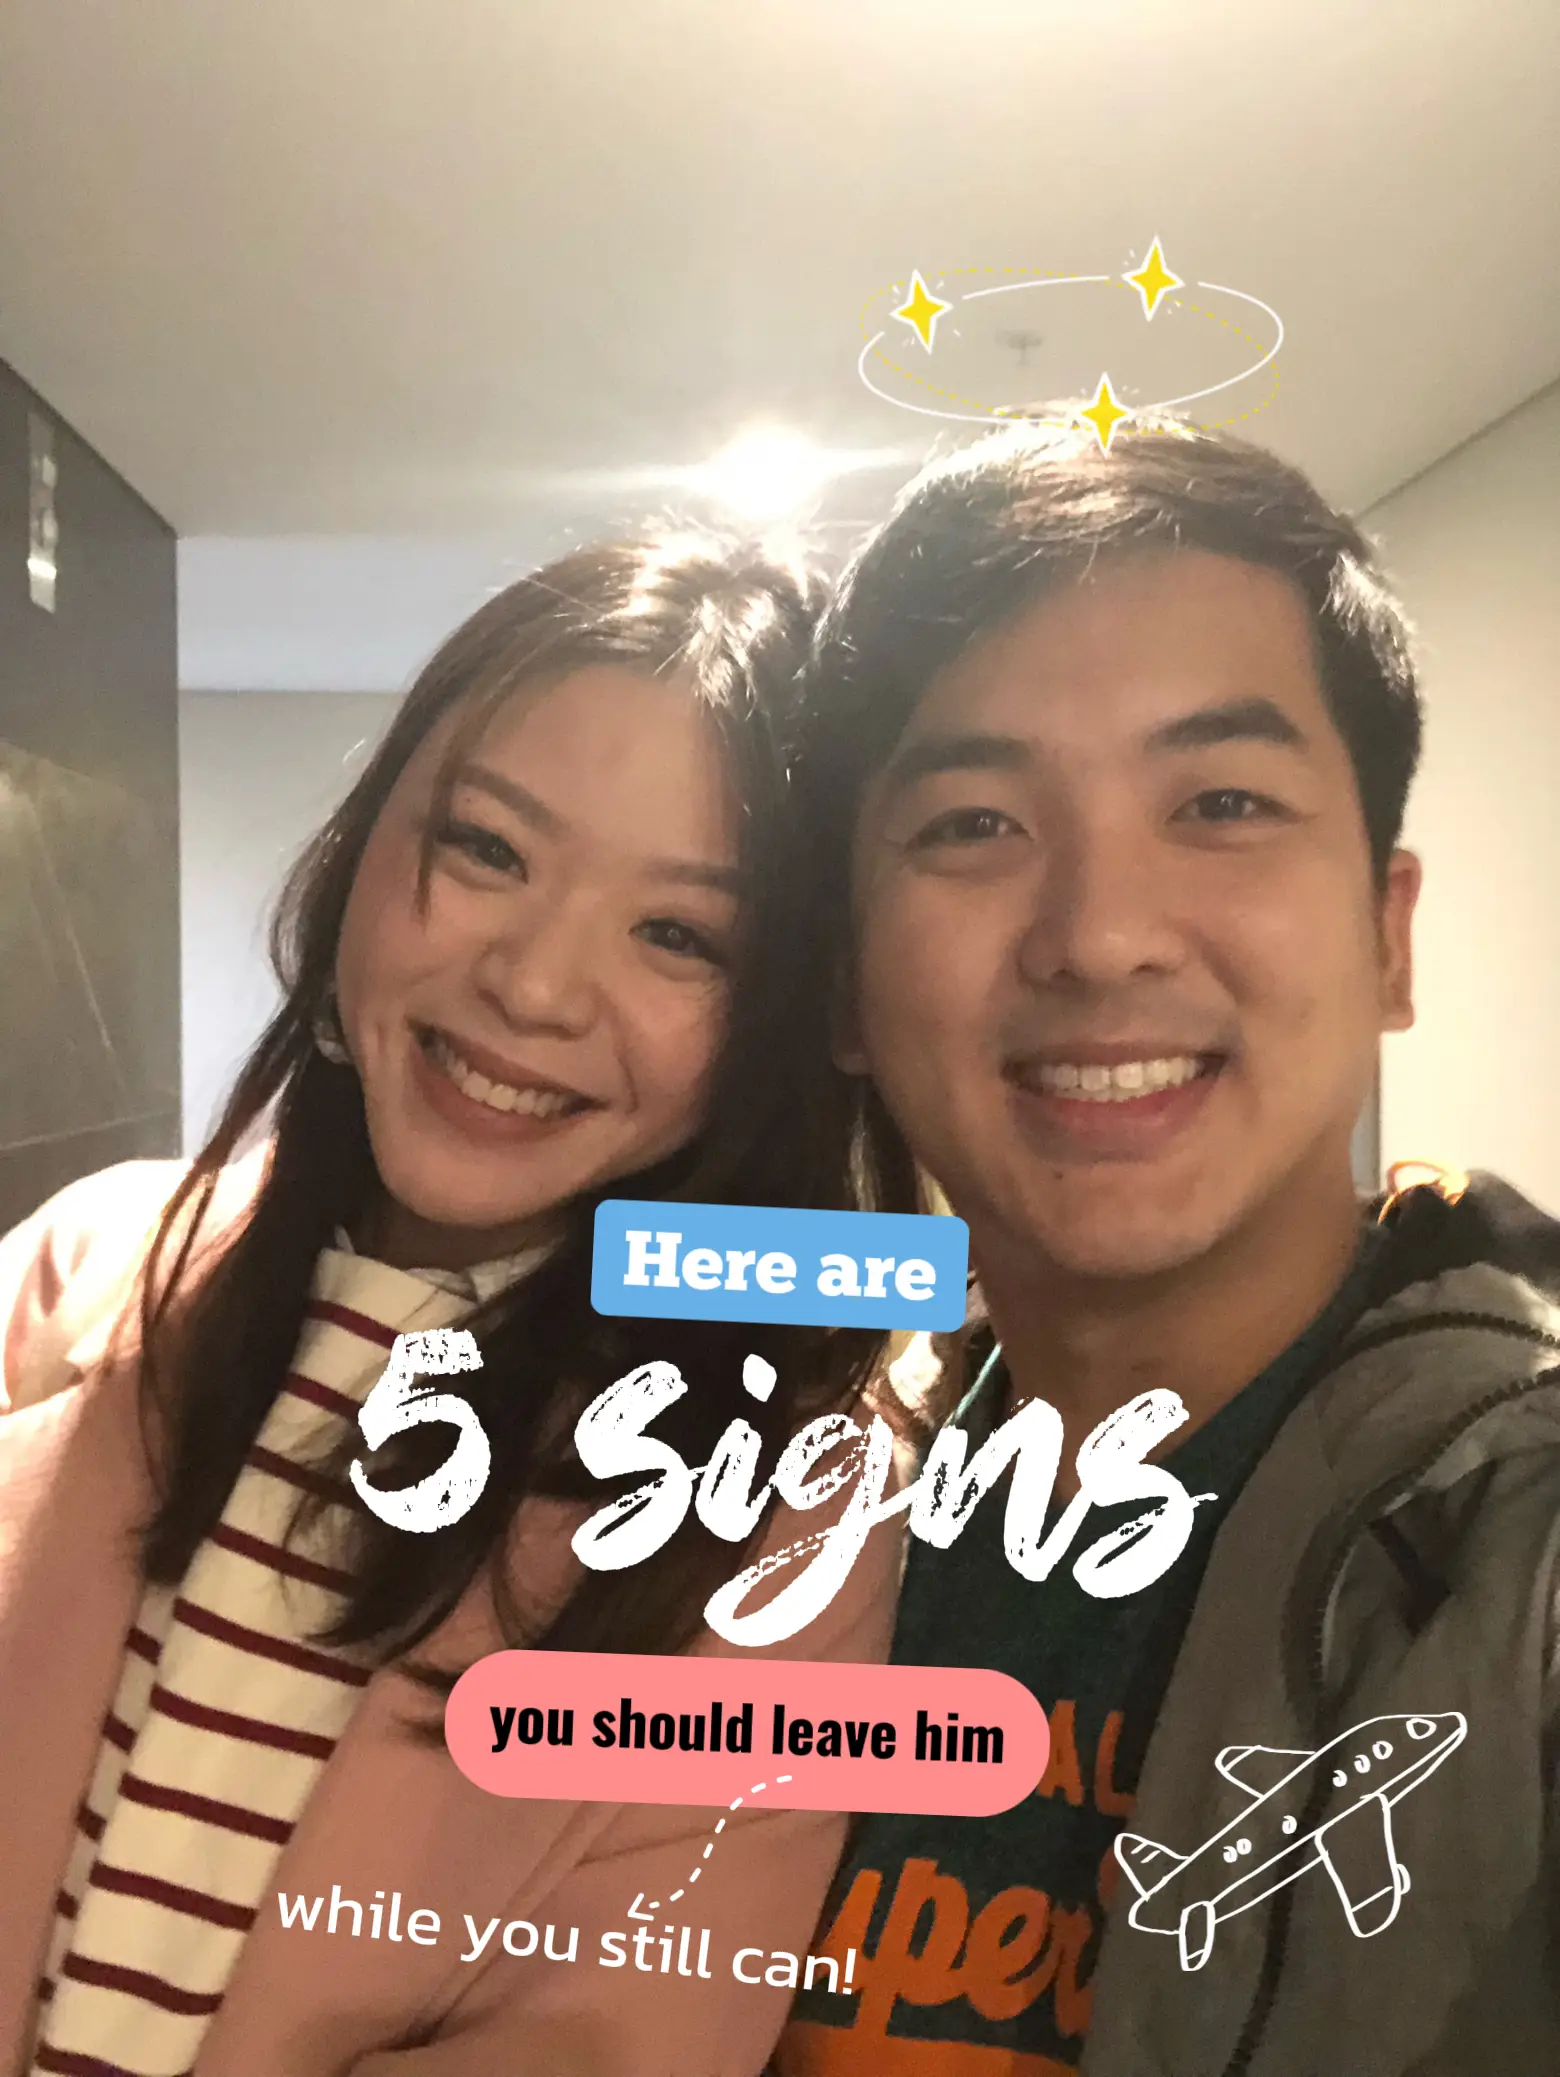 5 signs you should leave him 🏃🏻‍♀️🏃🏻‍♀️🏃🏻‍♀️'s images(0)